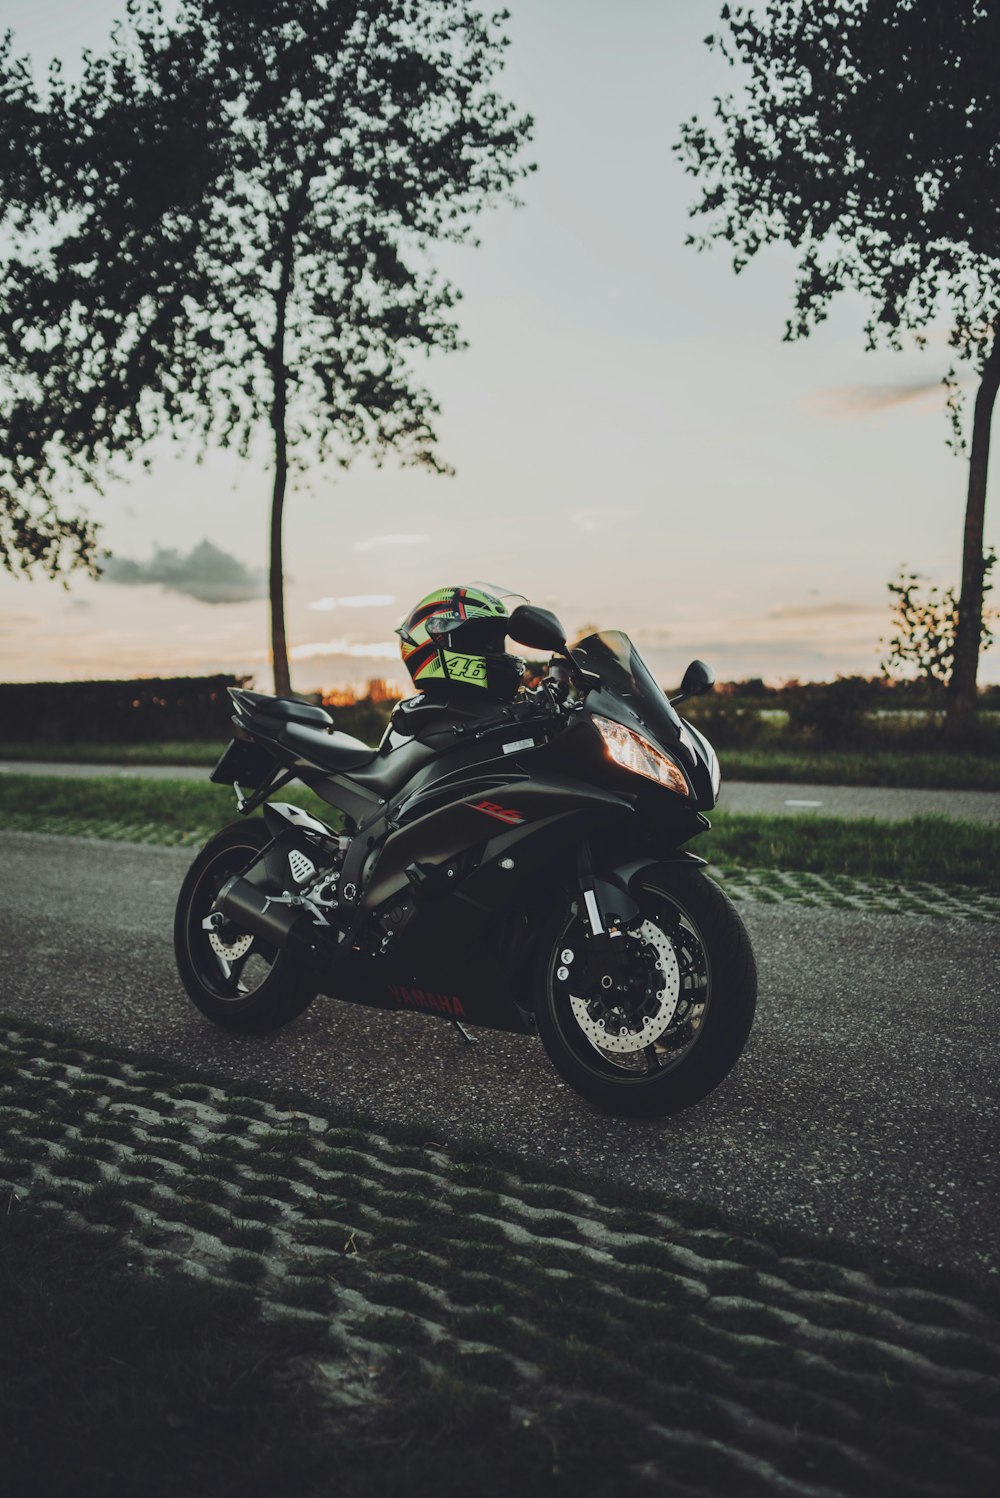 Yamaha R6 Pictures  Download Free Images on Unsplash